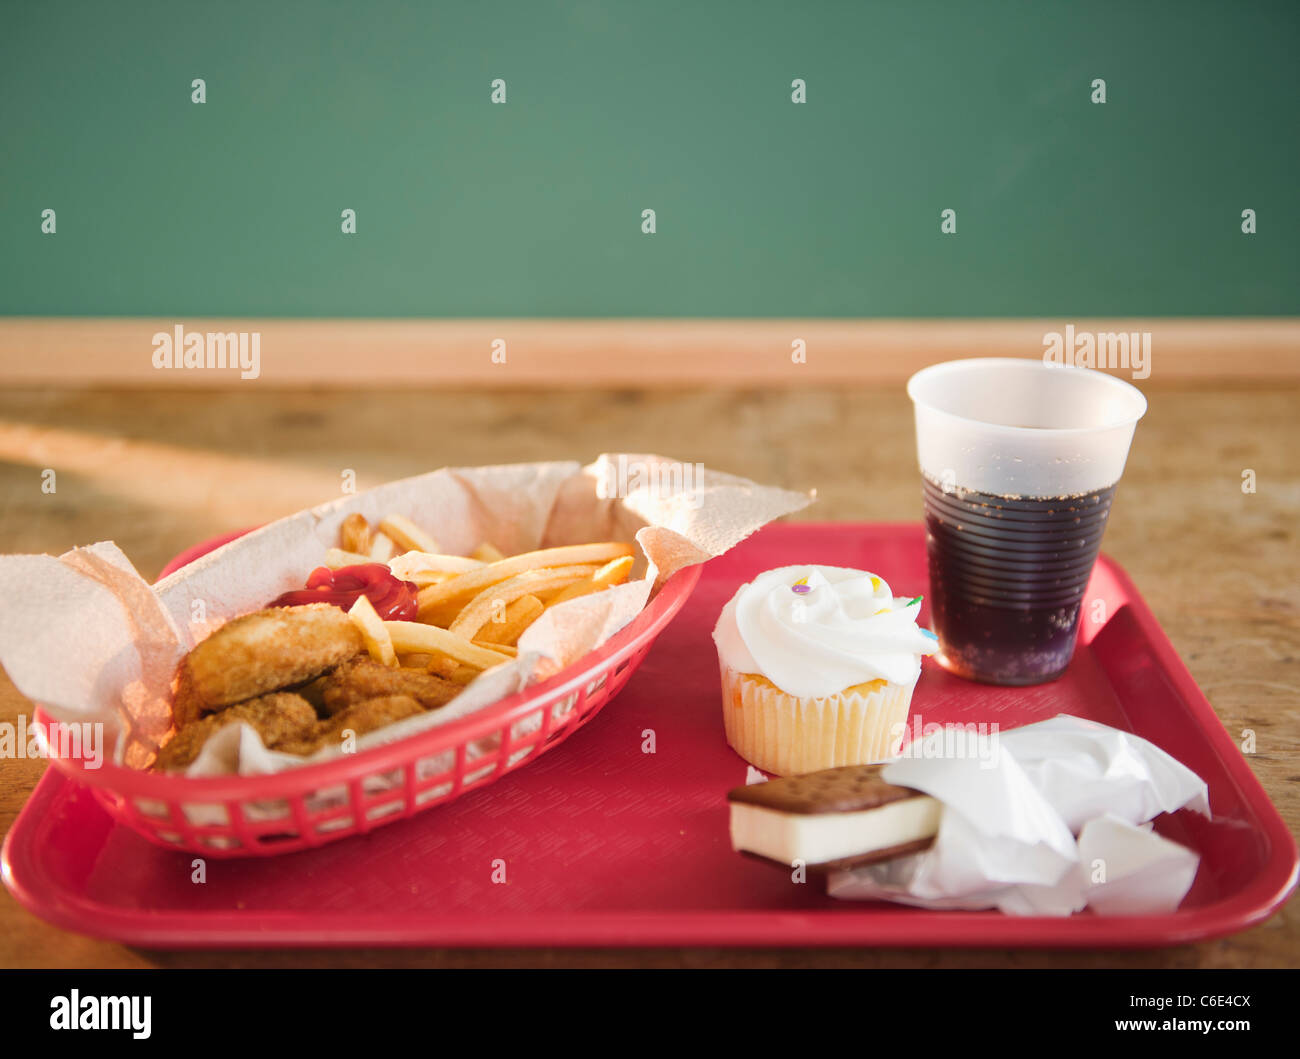 USA, New Jersey, Jersey City, Close up of unhealthy meal on tray Stock Photo